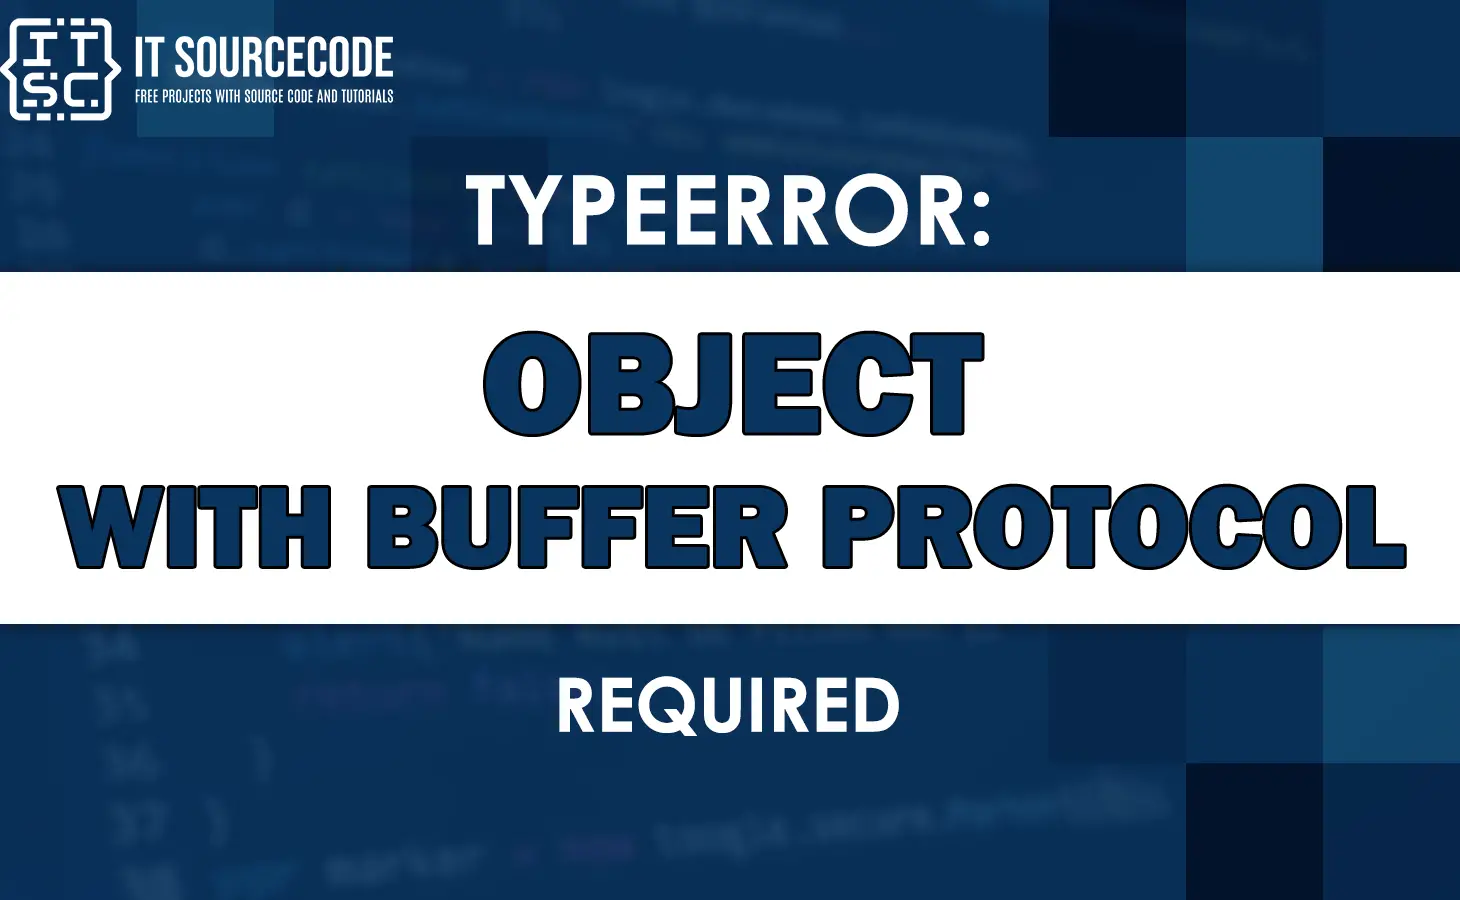 Typeerror: object with buffer protocol required